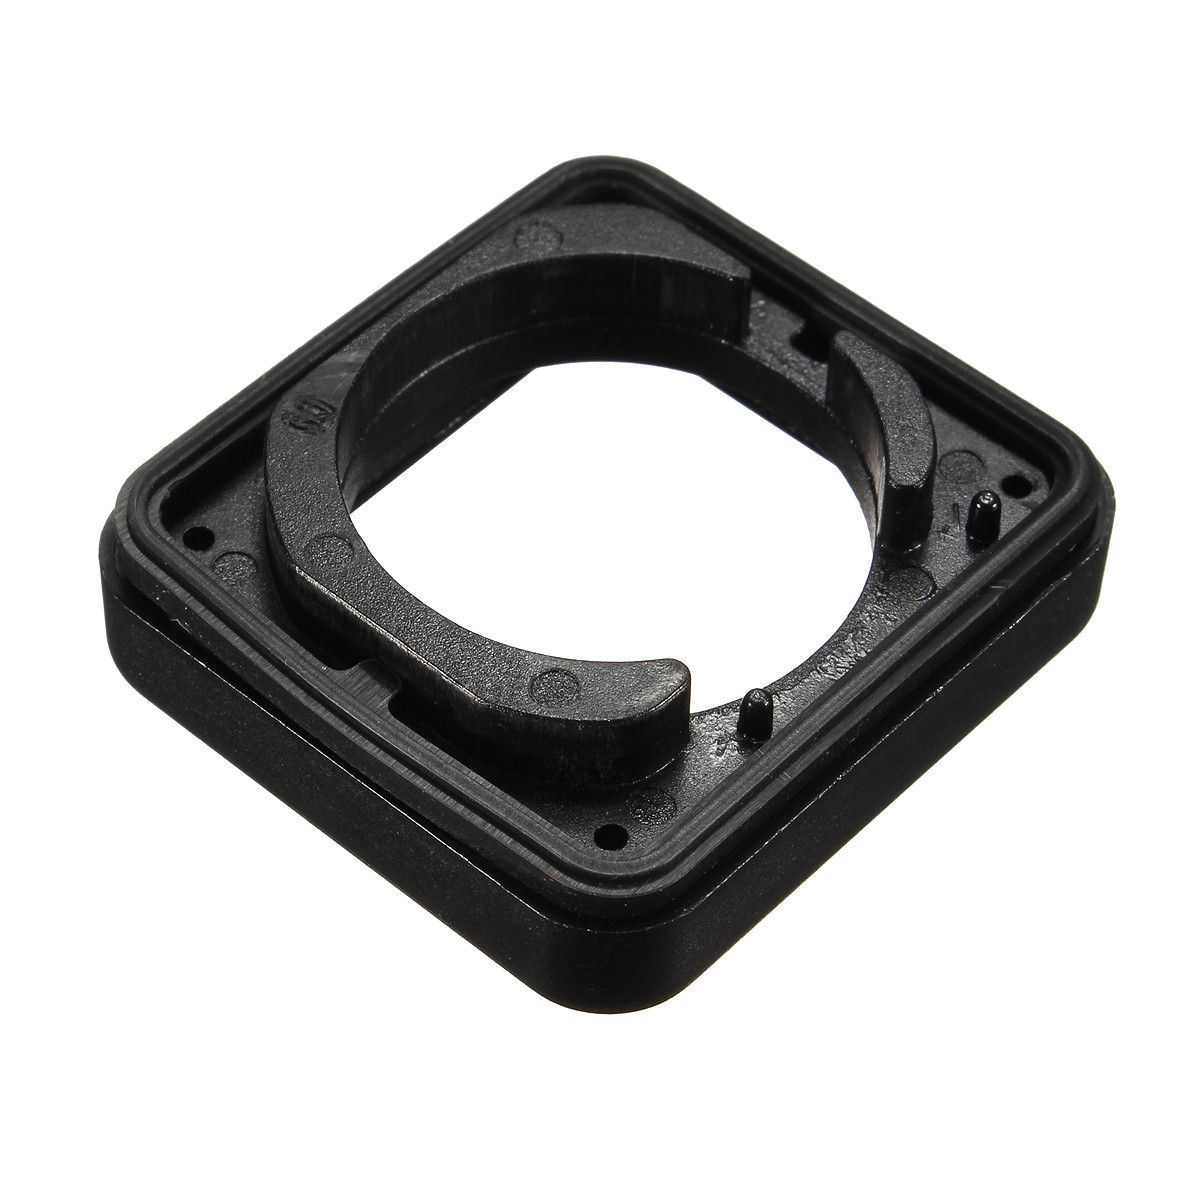 Waterproof-Cover-Lens-Housing-Protecting-Replacement-Kit-For-GoPro-Hero-4-3-Plus-1107343